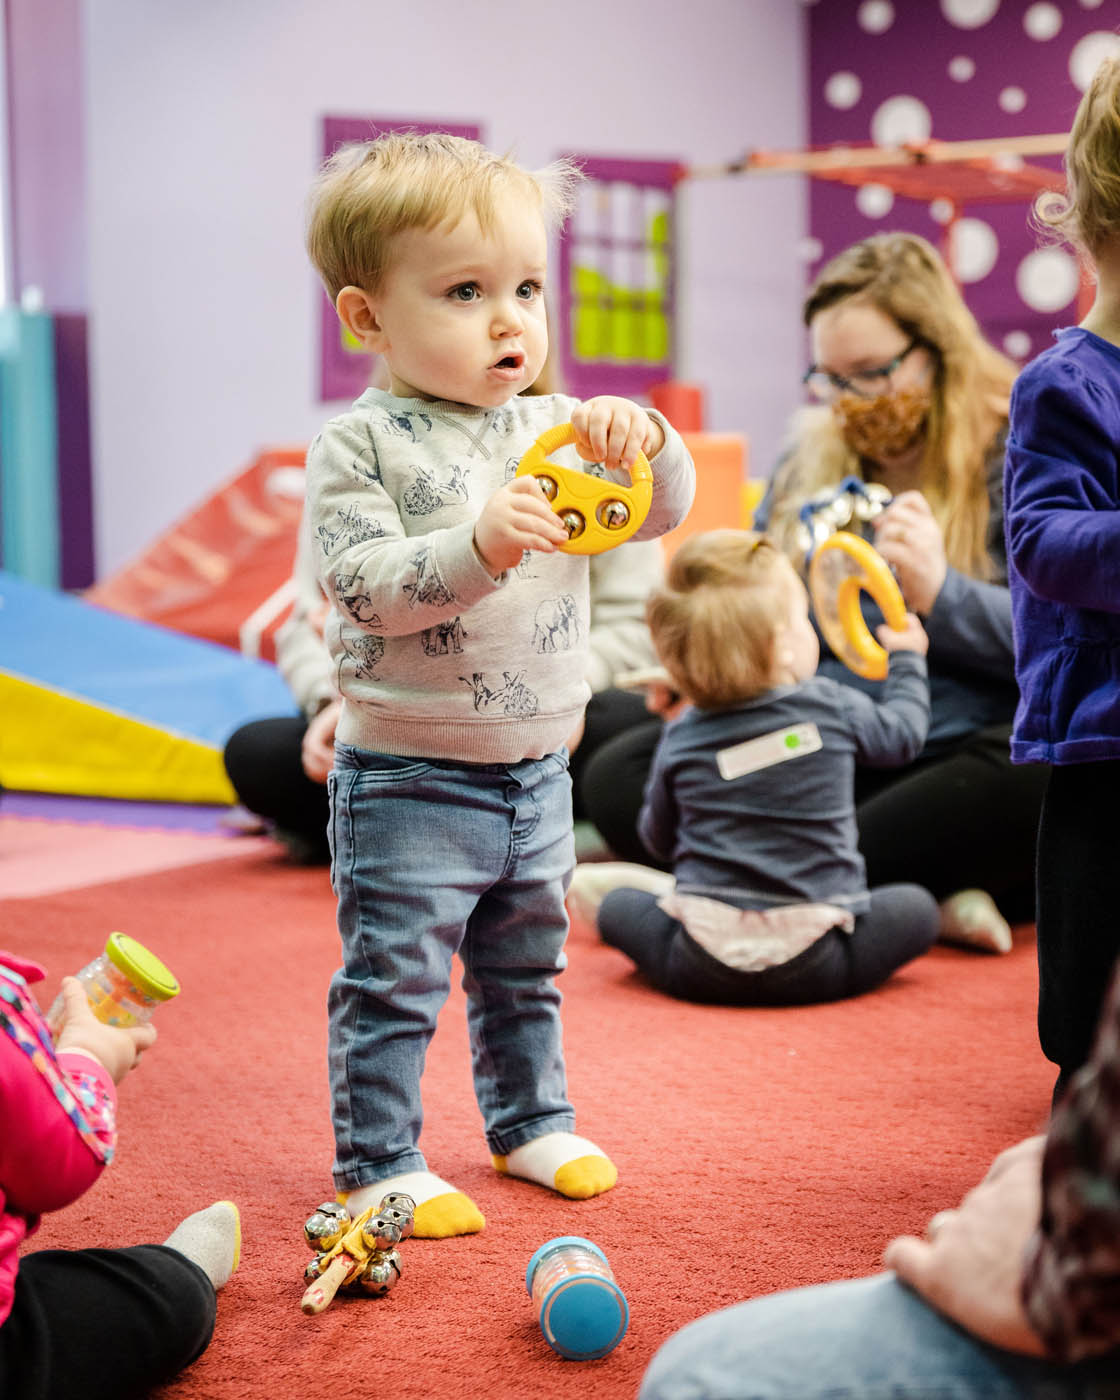 A boy enjoying the wonders of music at a baby music class offerd by Romp n' Roll.